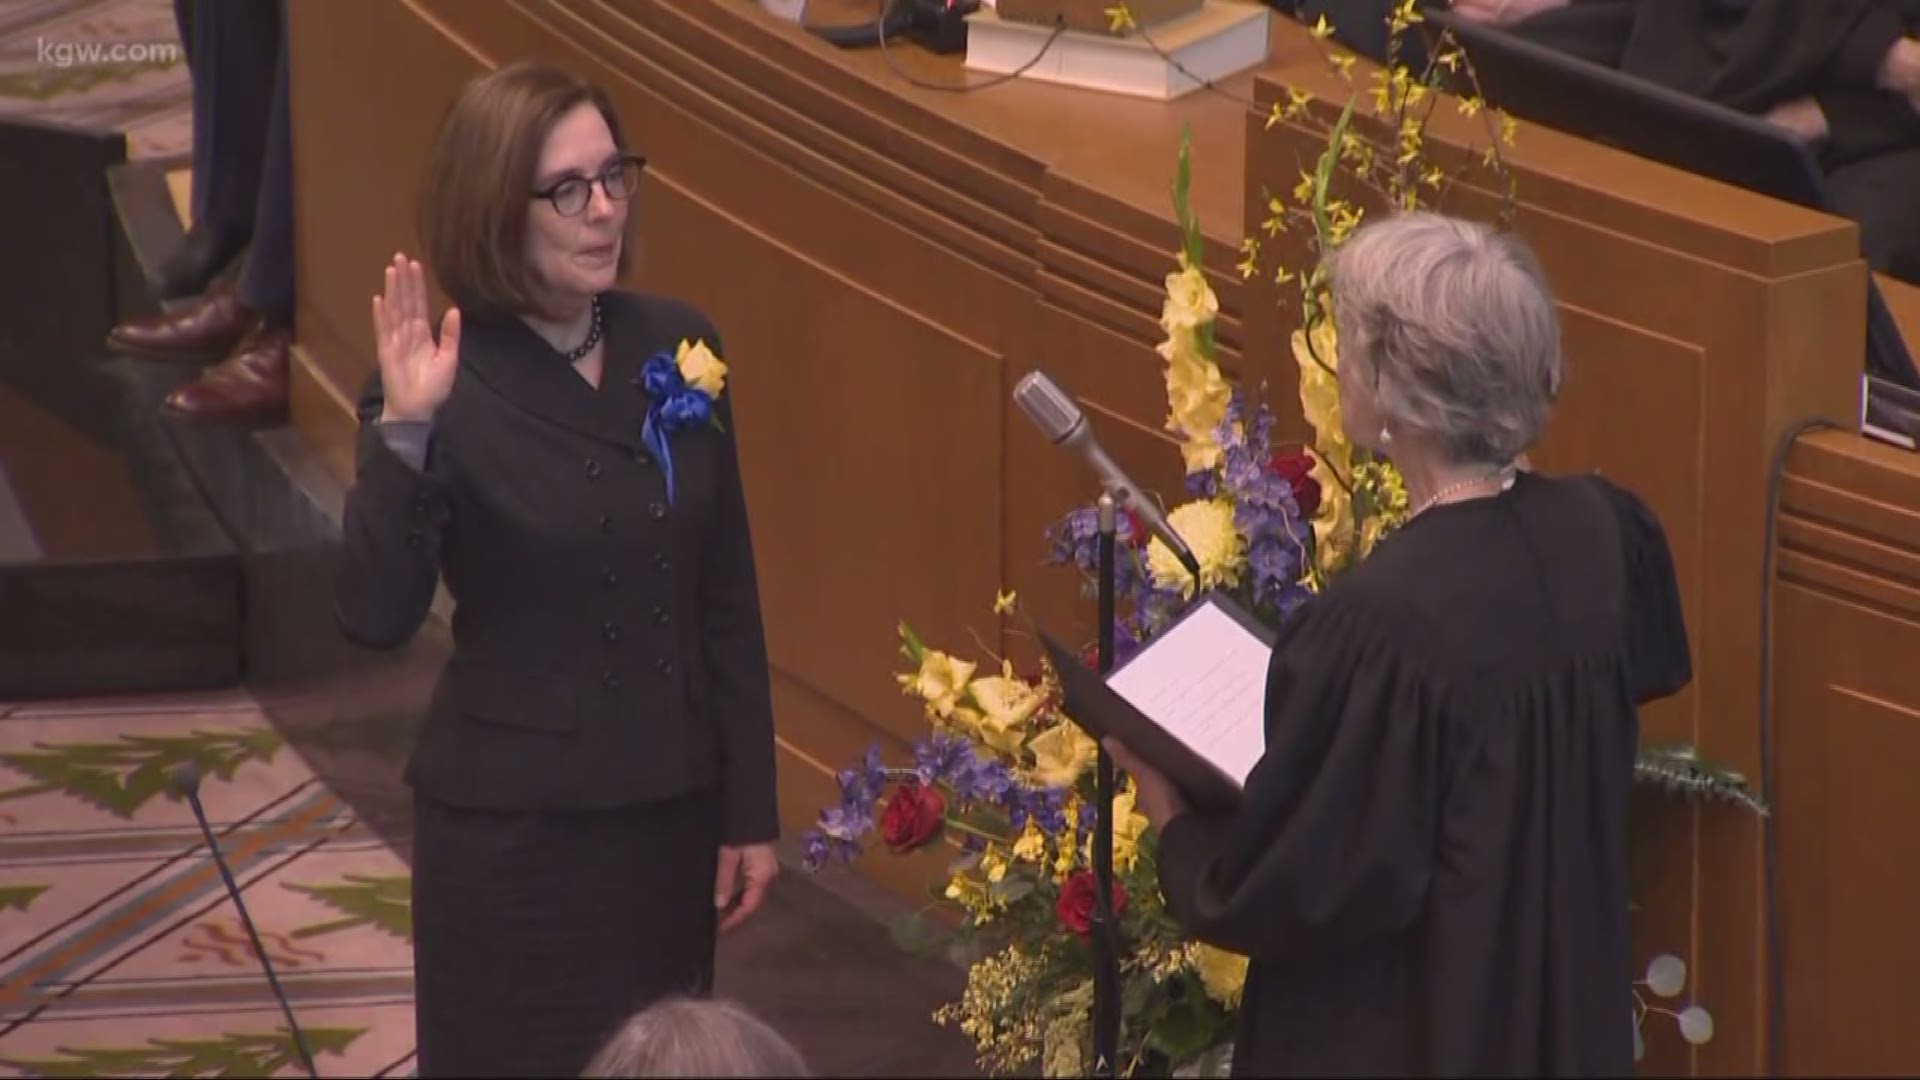 Gov. Kate Brown focused on education, housing and more during her inaugural address.